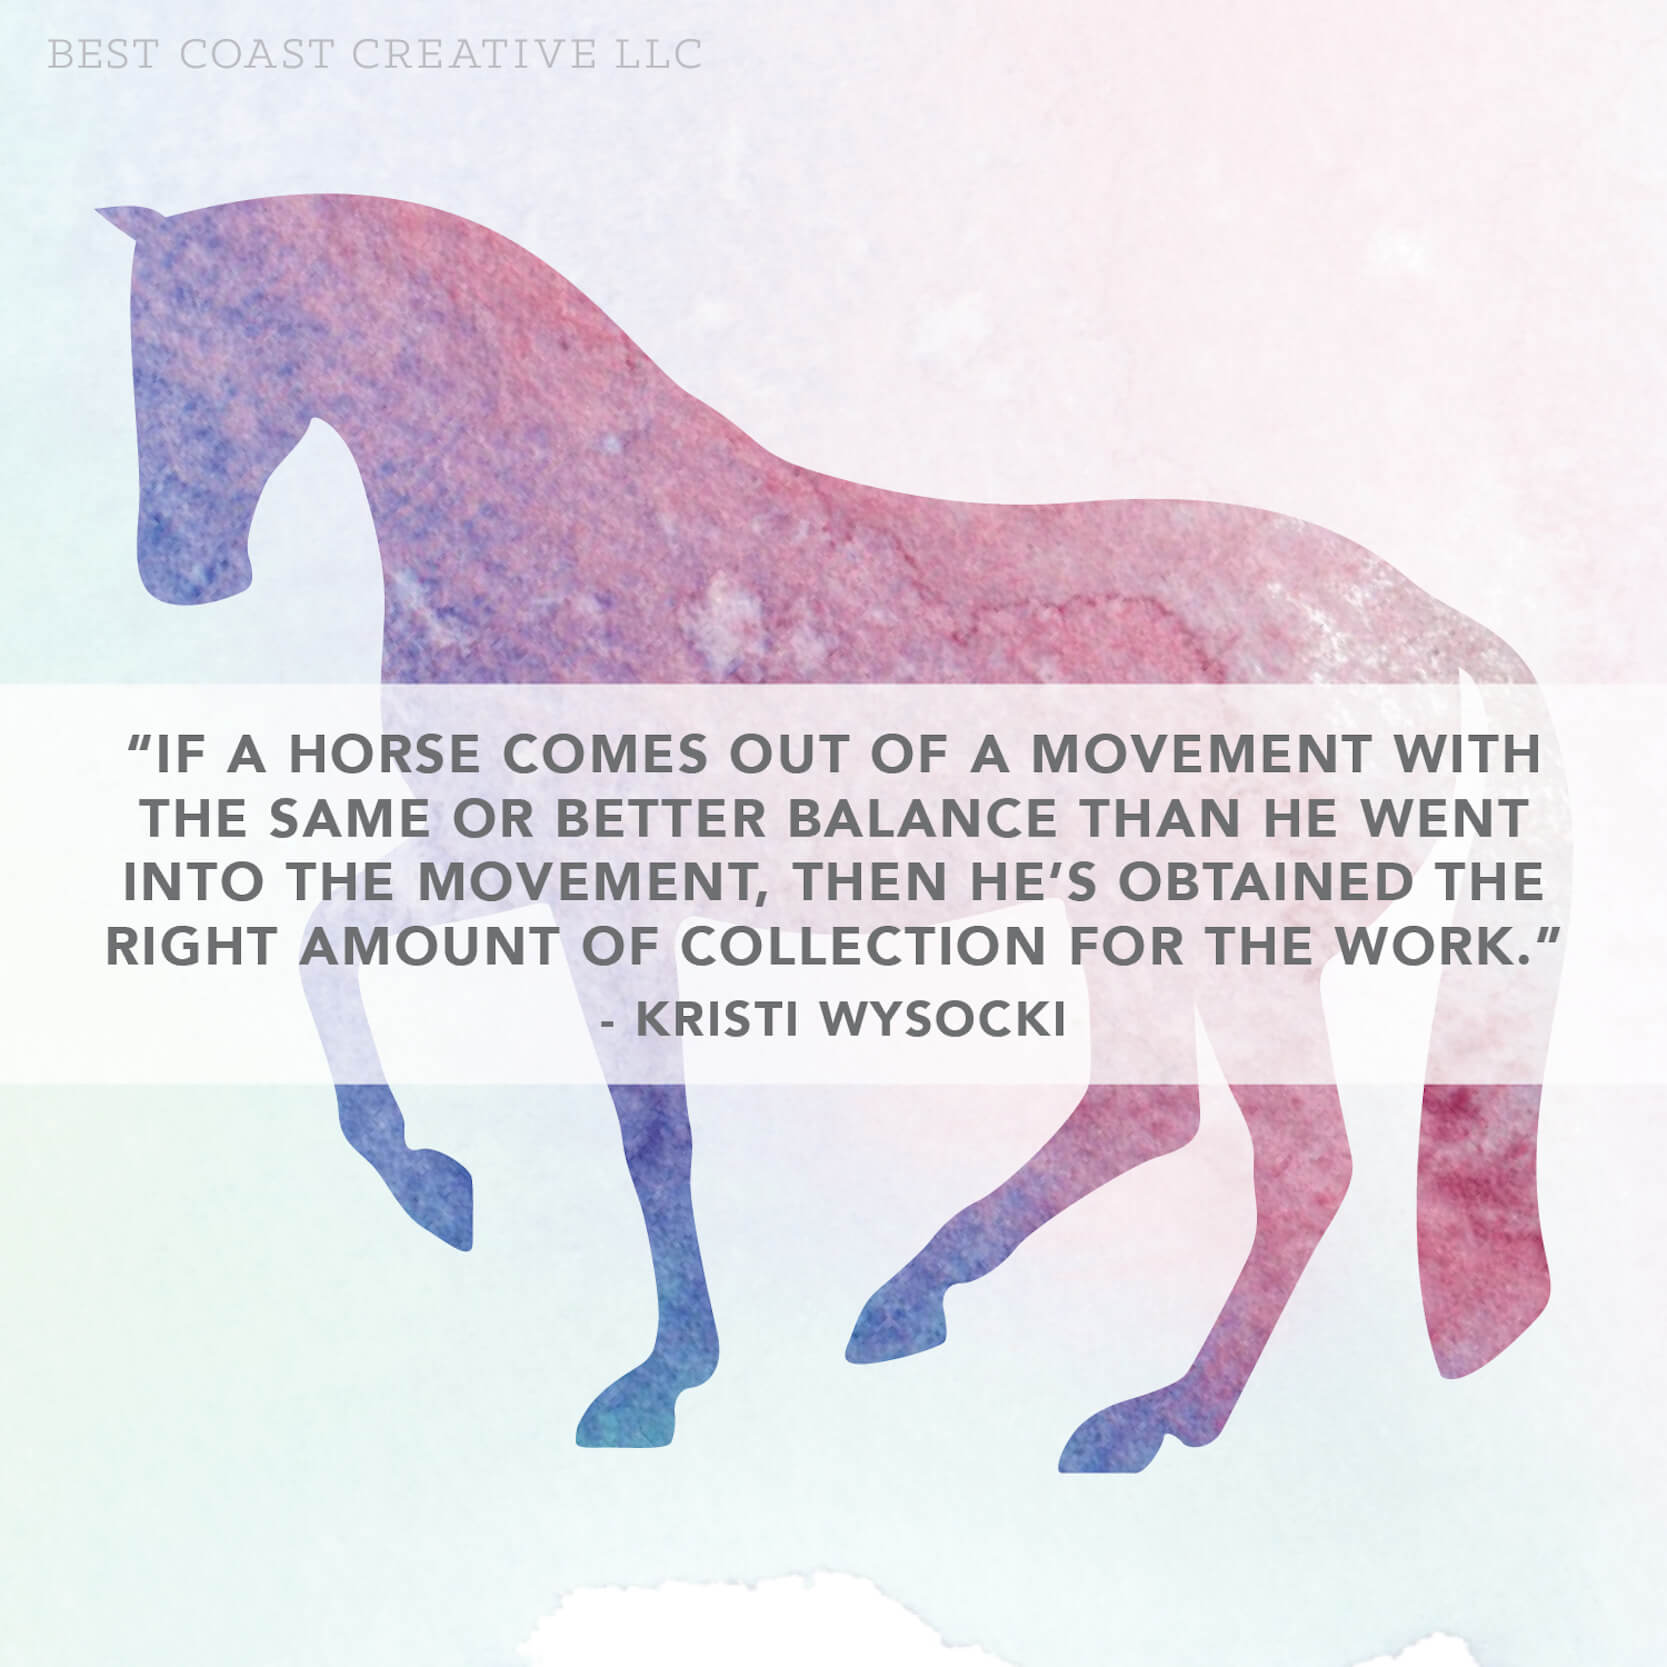 Horse Illustration with Kristi Wysocki clinic quote “If a horse comes out of a movement with the same or better balance than he went into the movement, then he’s obtained the right amount of collection for the work.”